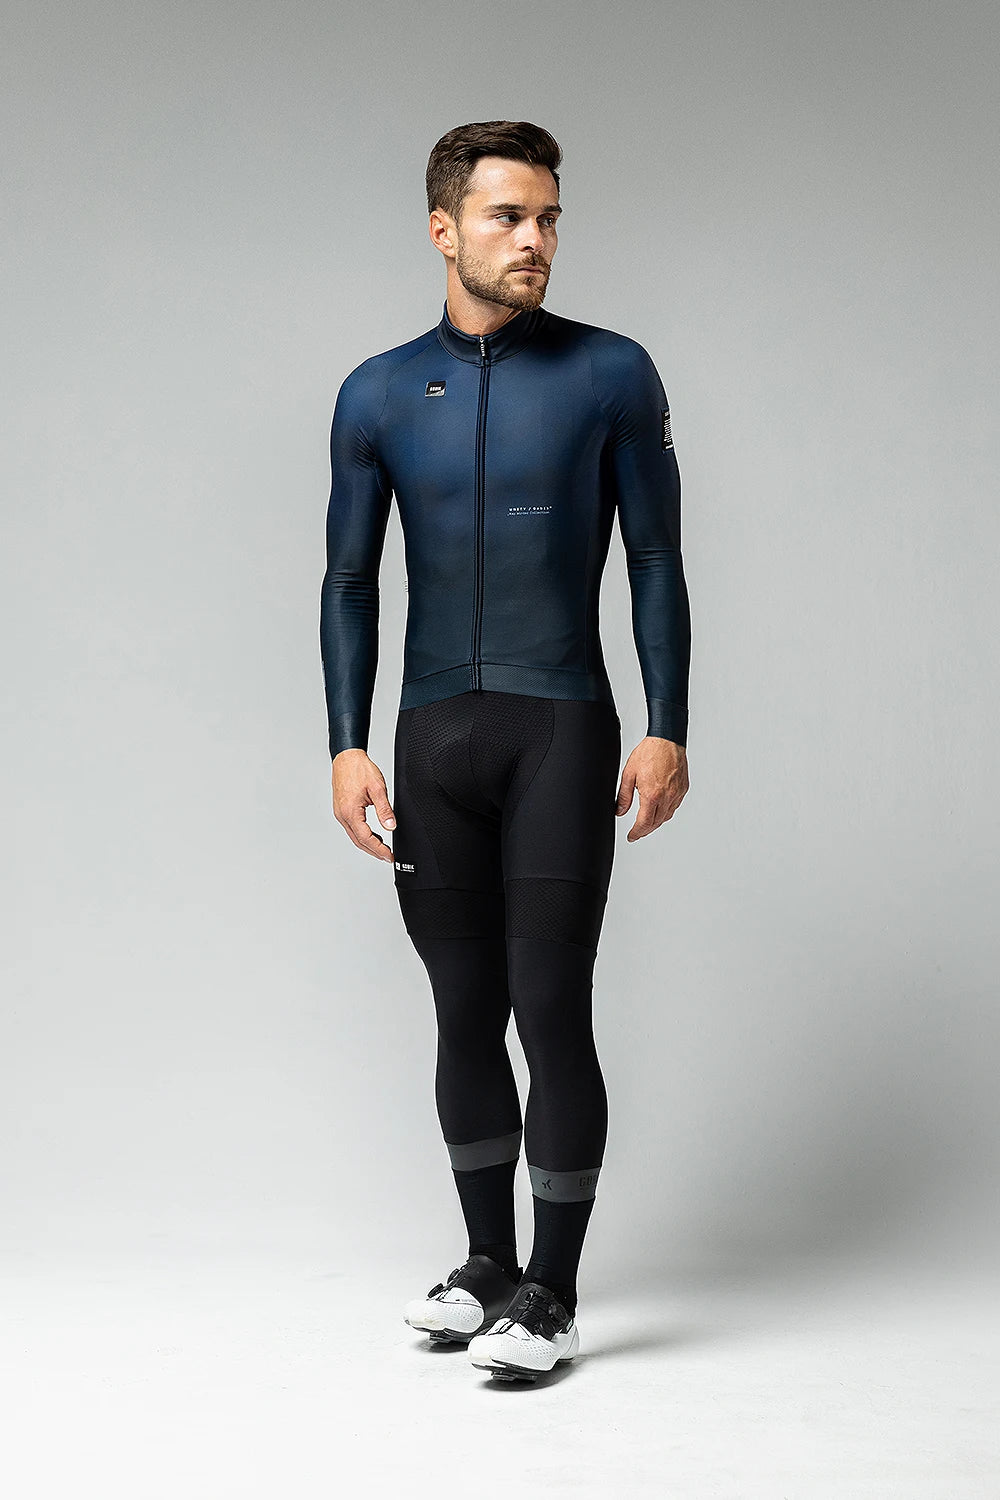 MAILLOT À MANCHES LONGUES HYDER HOMME Muscari